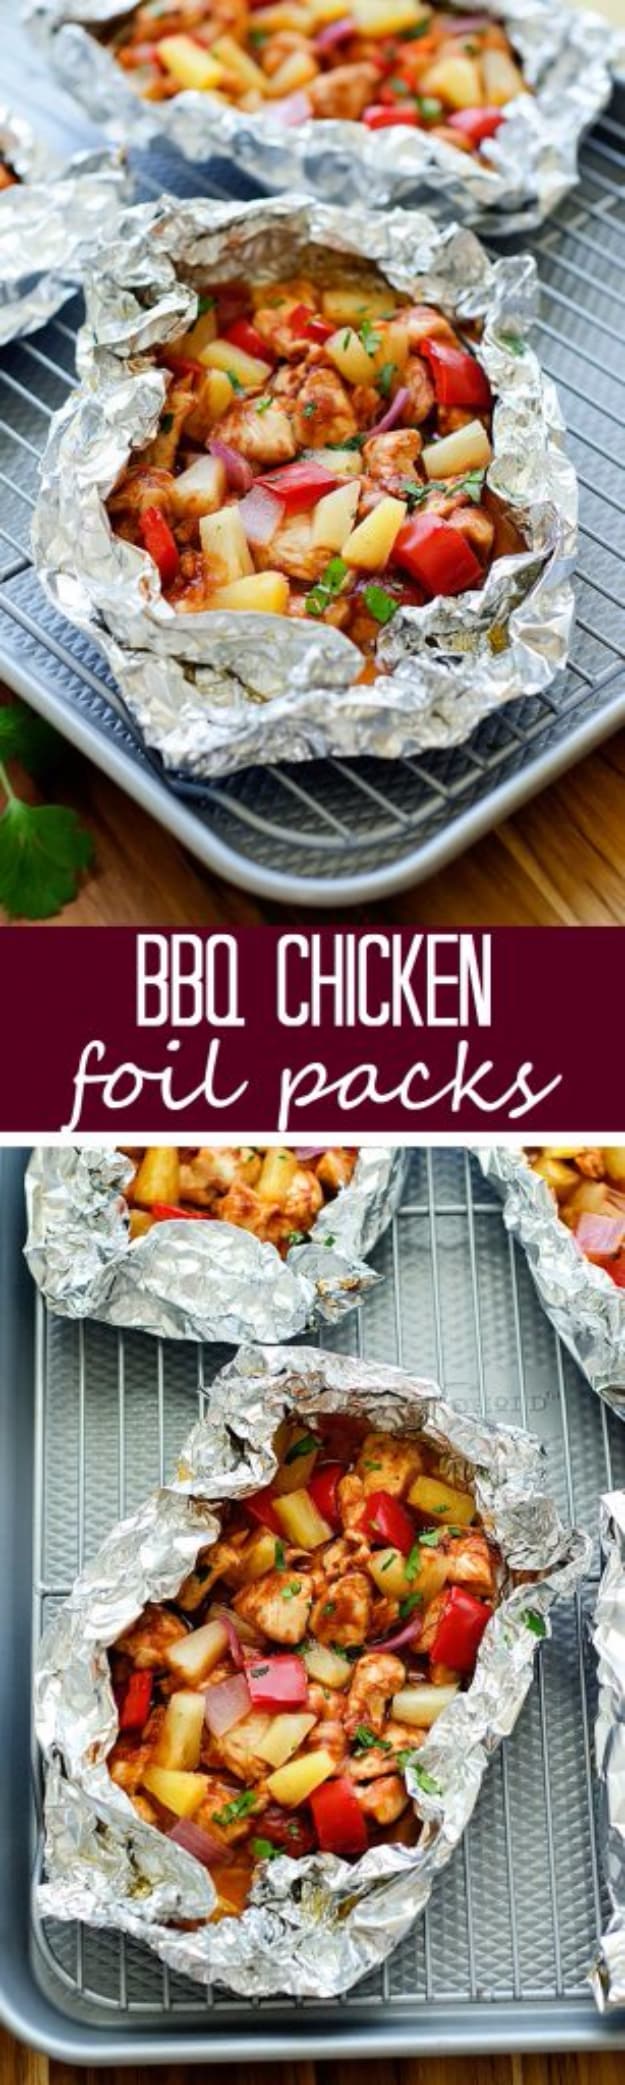 DIY Tin Foil Camping Recipes - BBQ Chicken Foil Packs - Tin Foil Dinners, Ideas for Camping Trips healthy Easy Make Ahead Recipe Ideas for the Campfire. Breakfast, Lunch, Dinner and Dessert, #recipes #camping